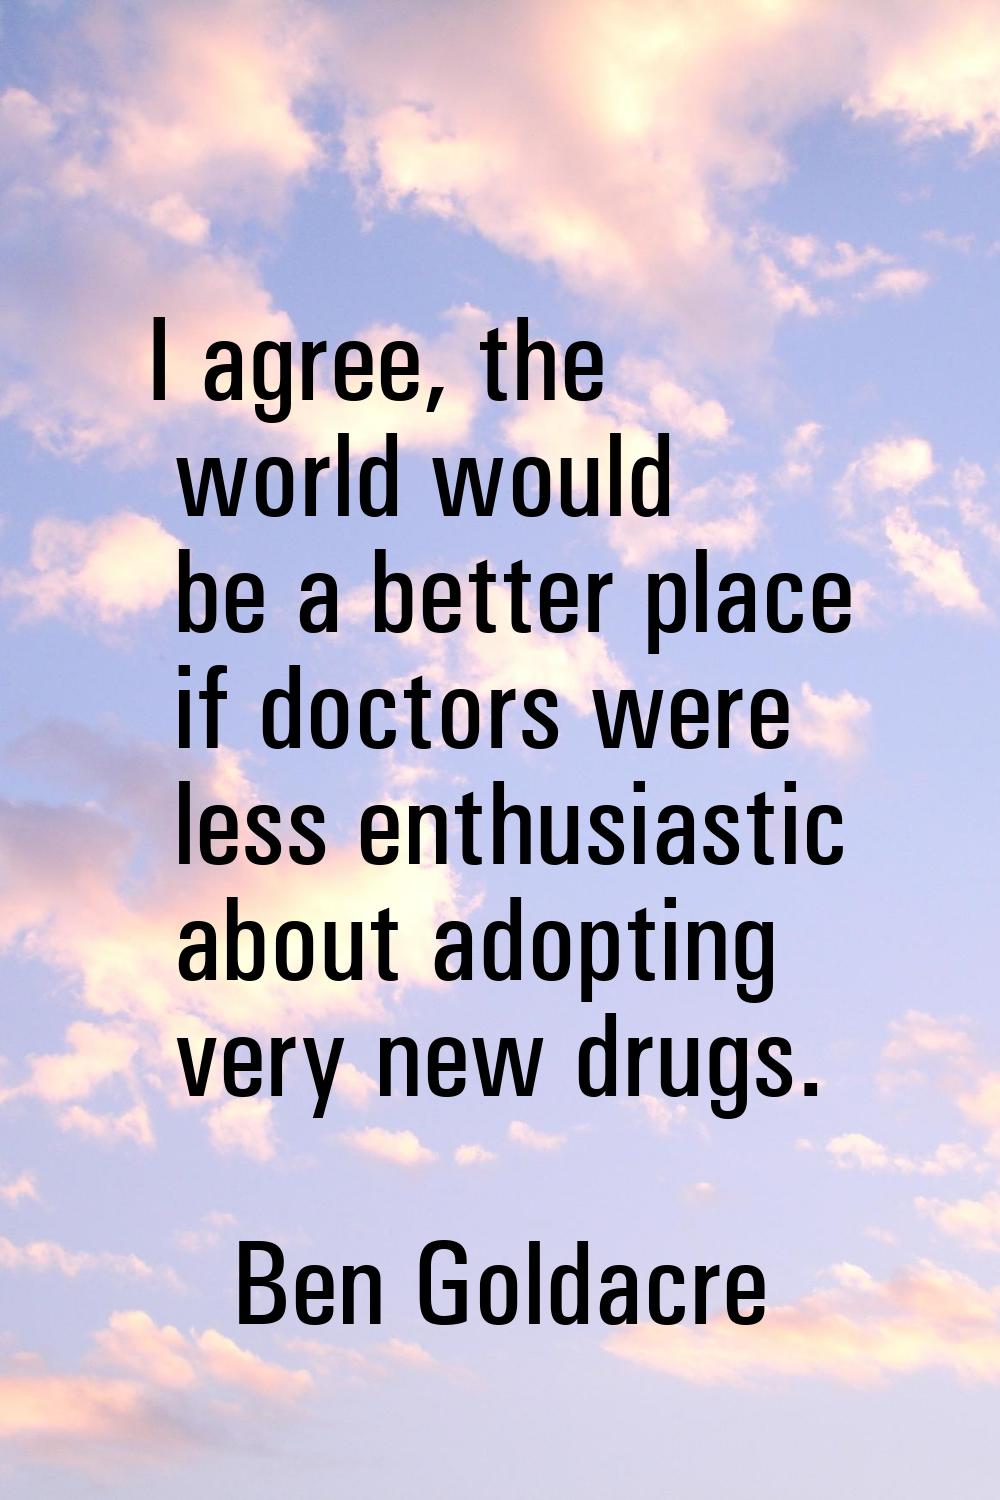 I agree, the world would be a better place if doctors were less enthusiastic about adopting very ne